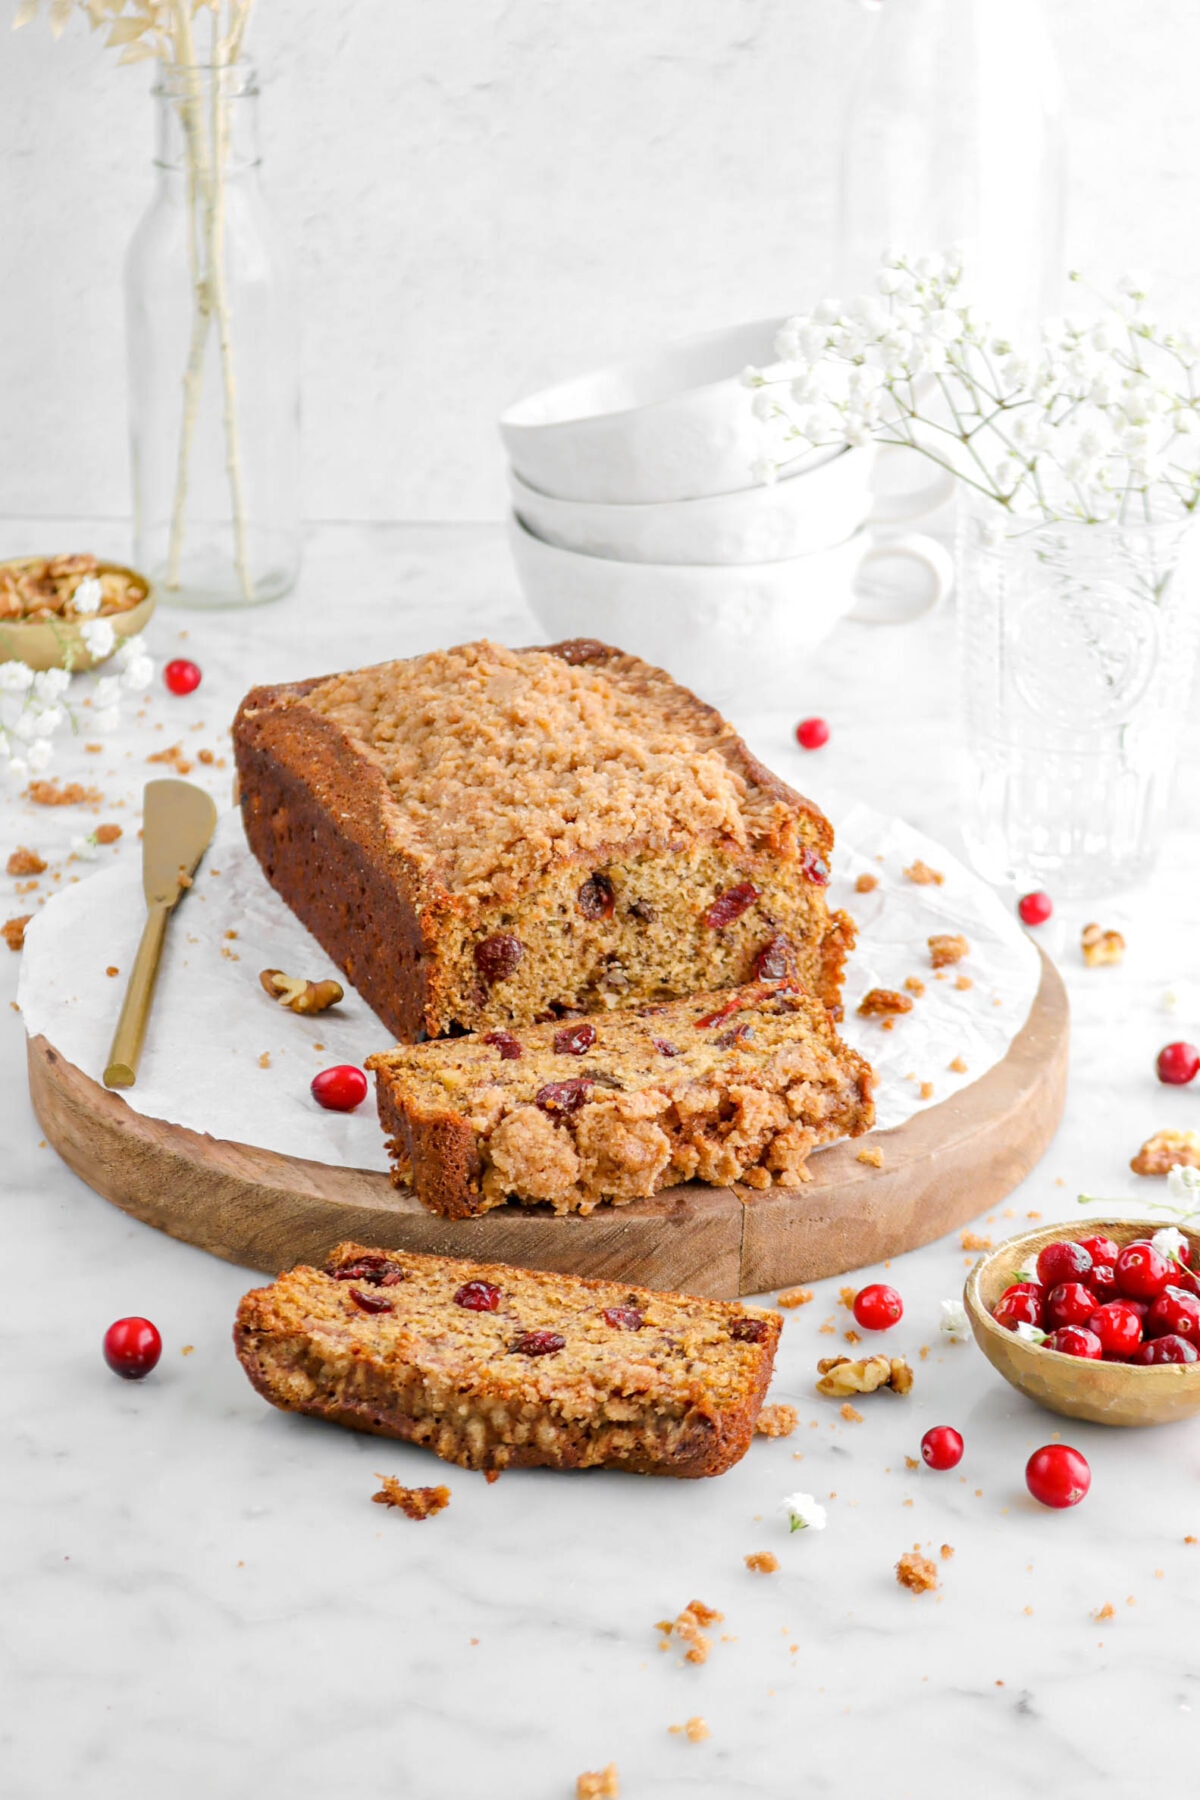 two slices of cranberry walnut banana bread laying in front of loaf on wood board with gold knife beside, fresh cranberries, white flowers, and walnut pieces around.